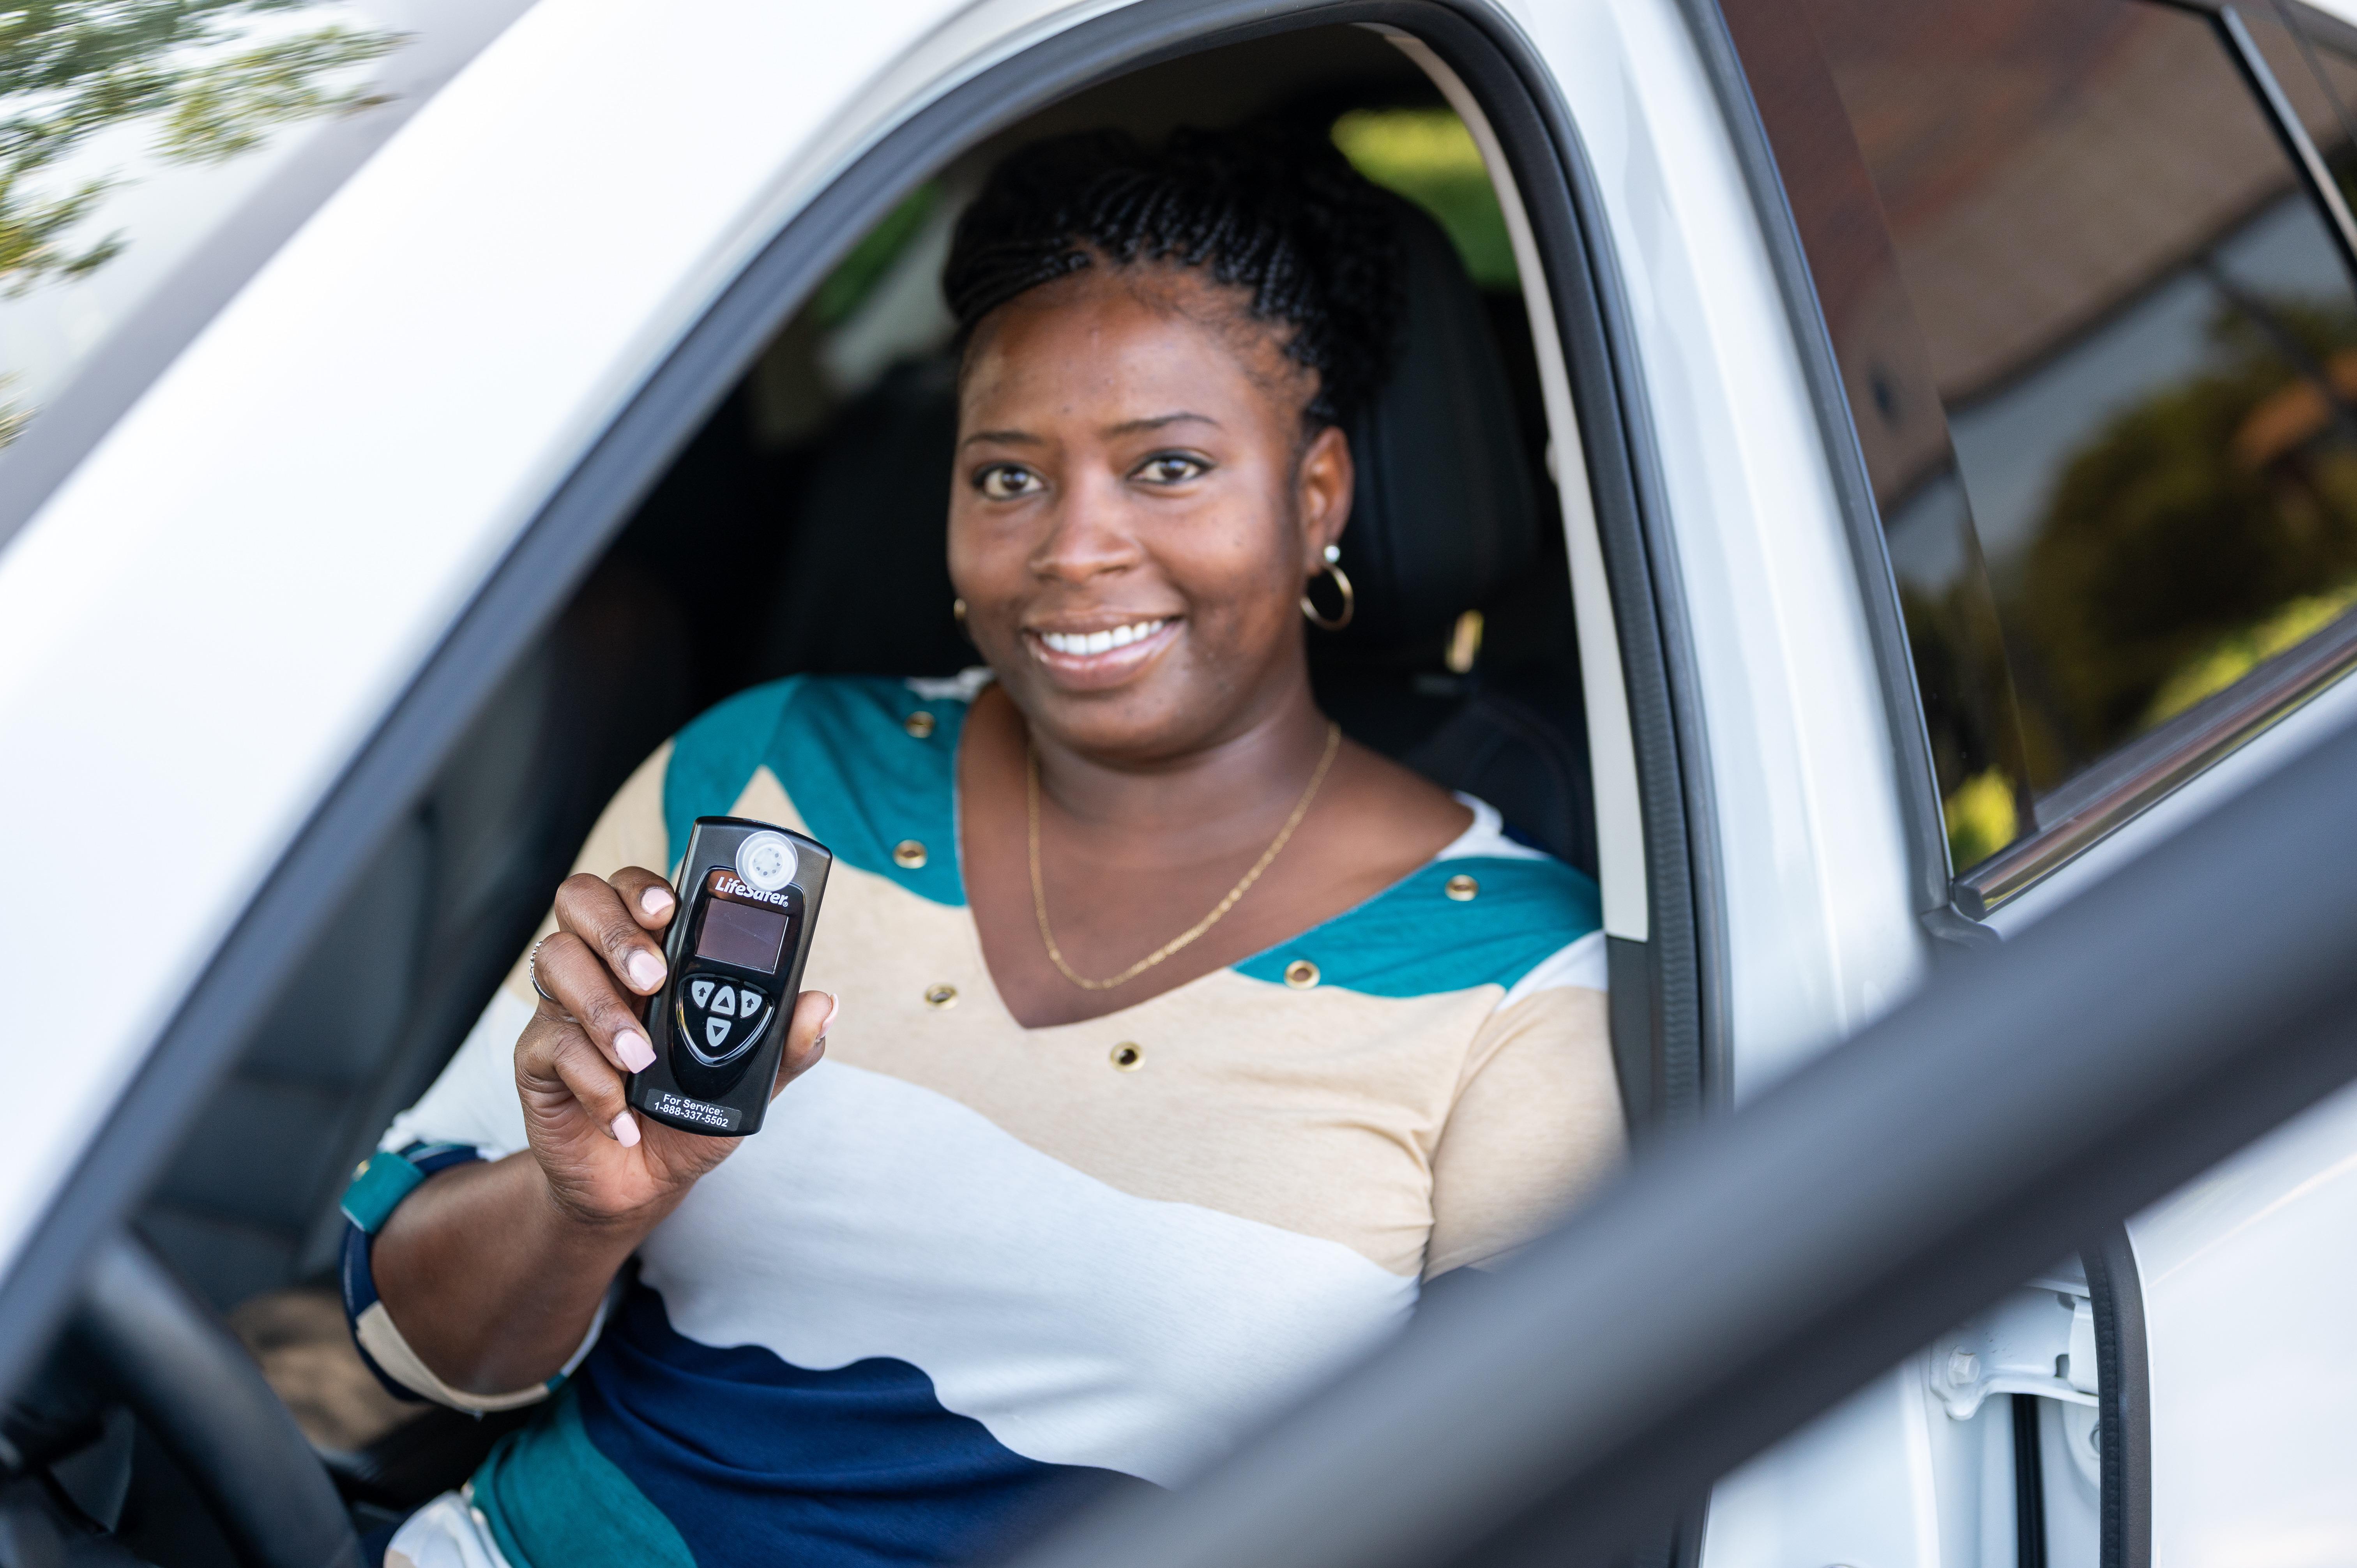 LifeSafer's ignition interlock device is the most discreet and easiest to use car breathalyzer device on the market.